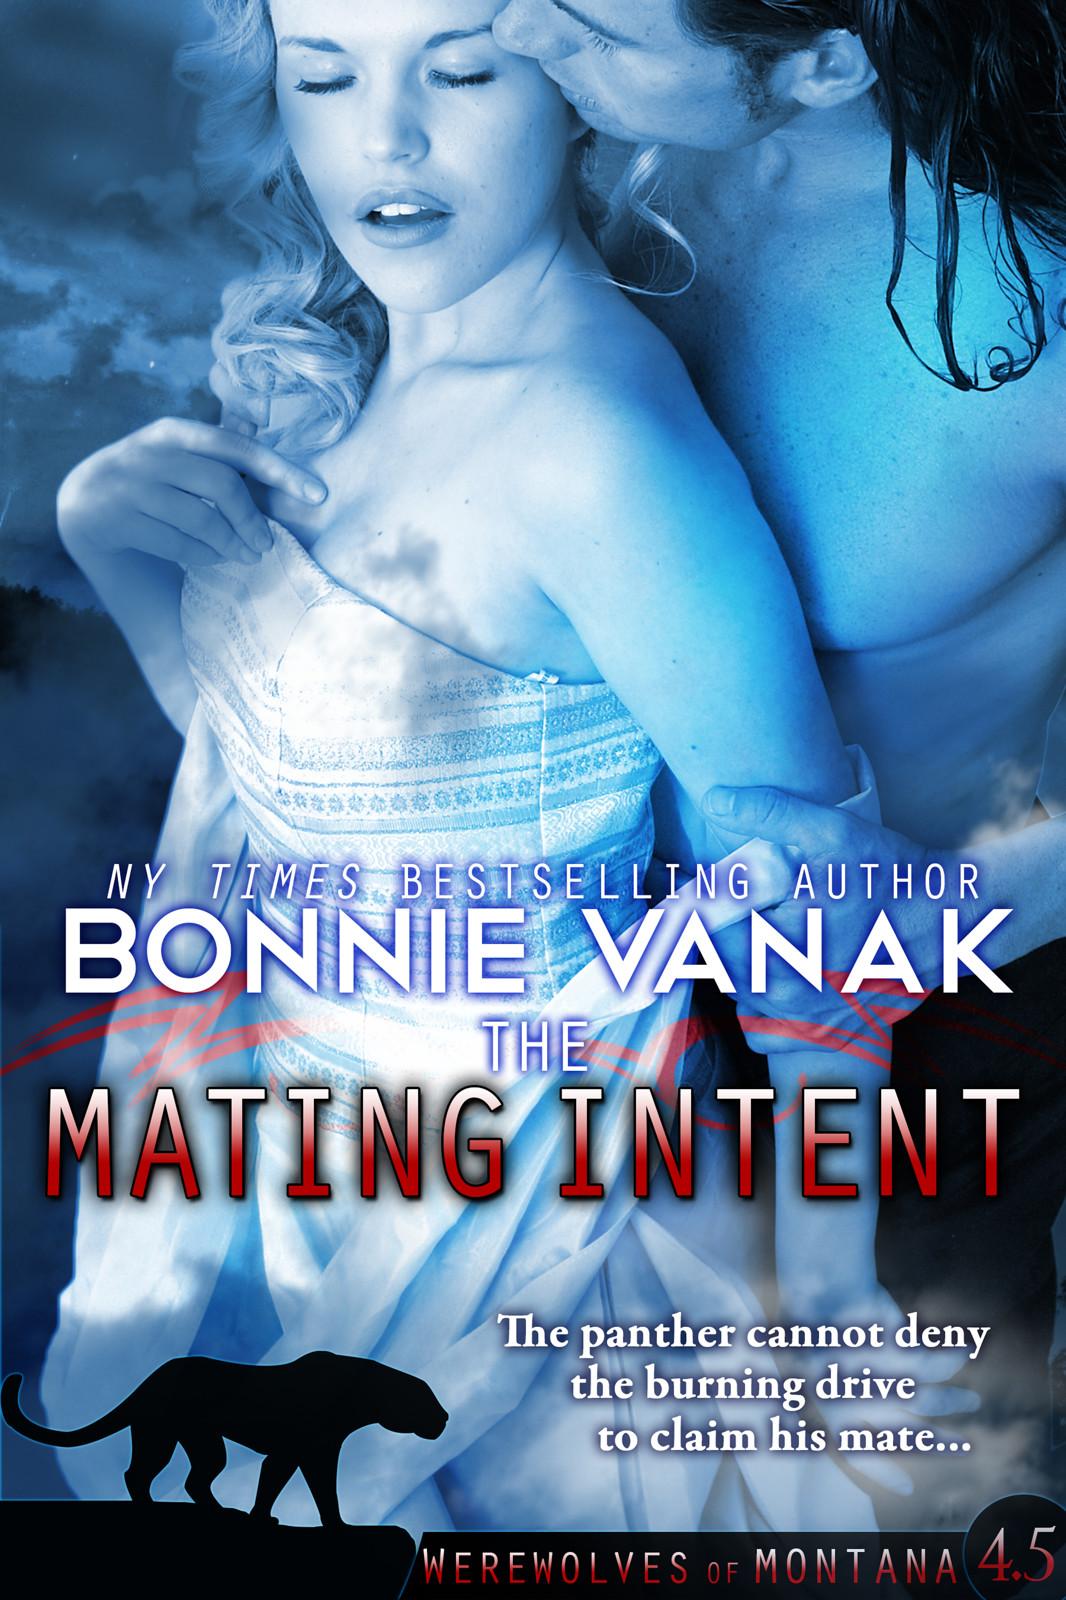 The Mating Intent-mobi by Bonnie Vanak